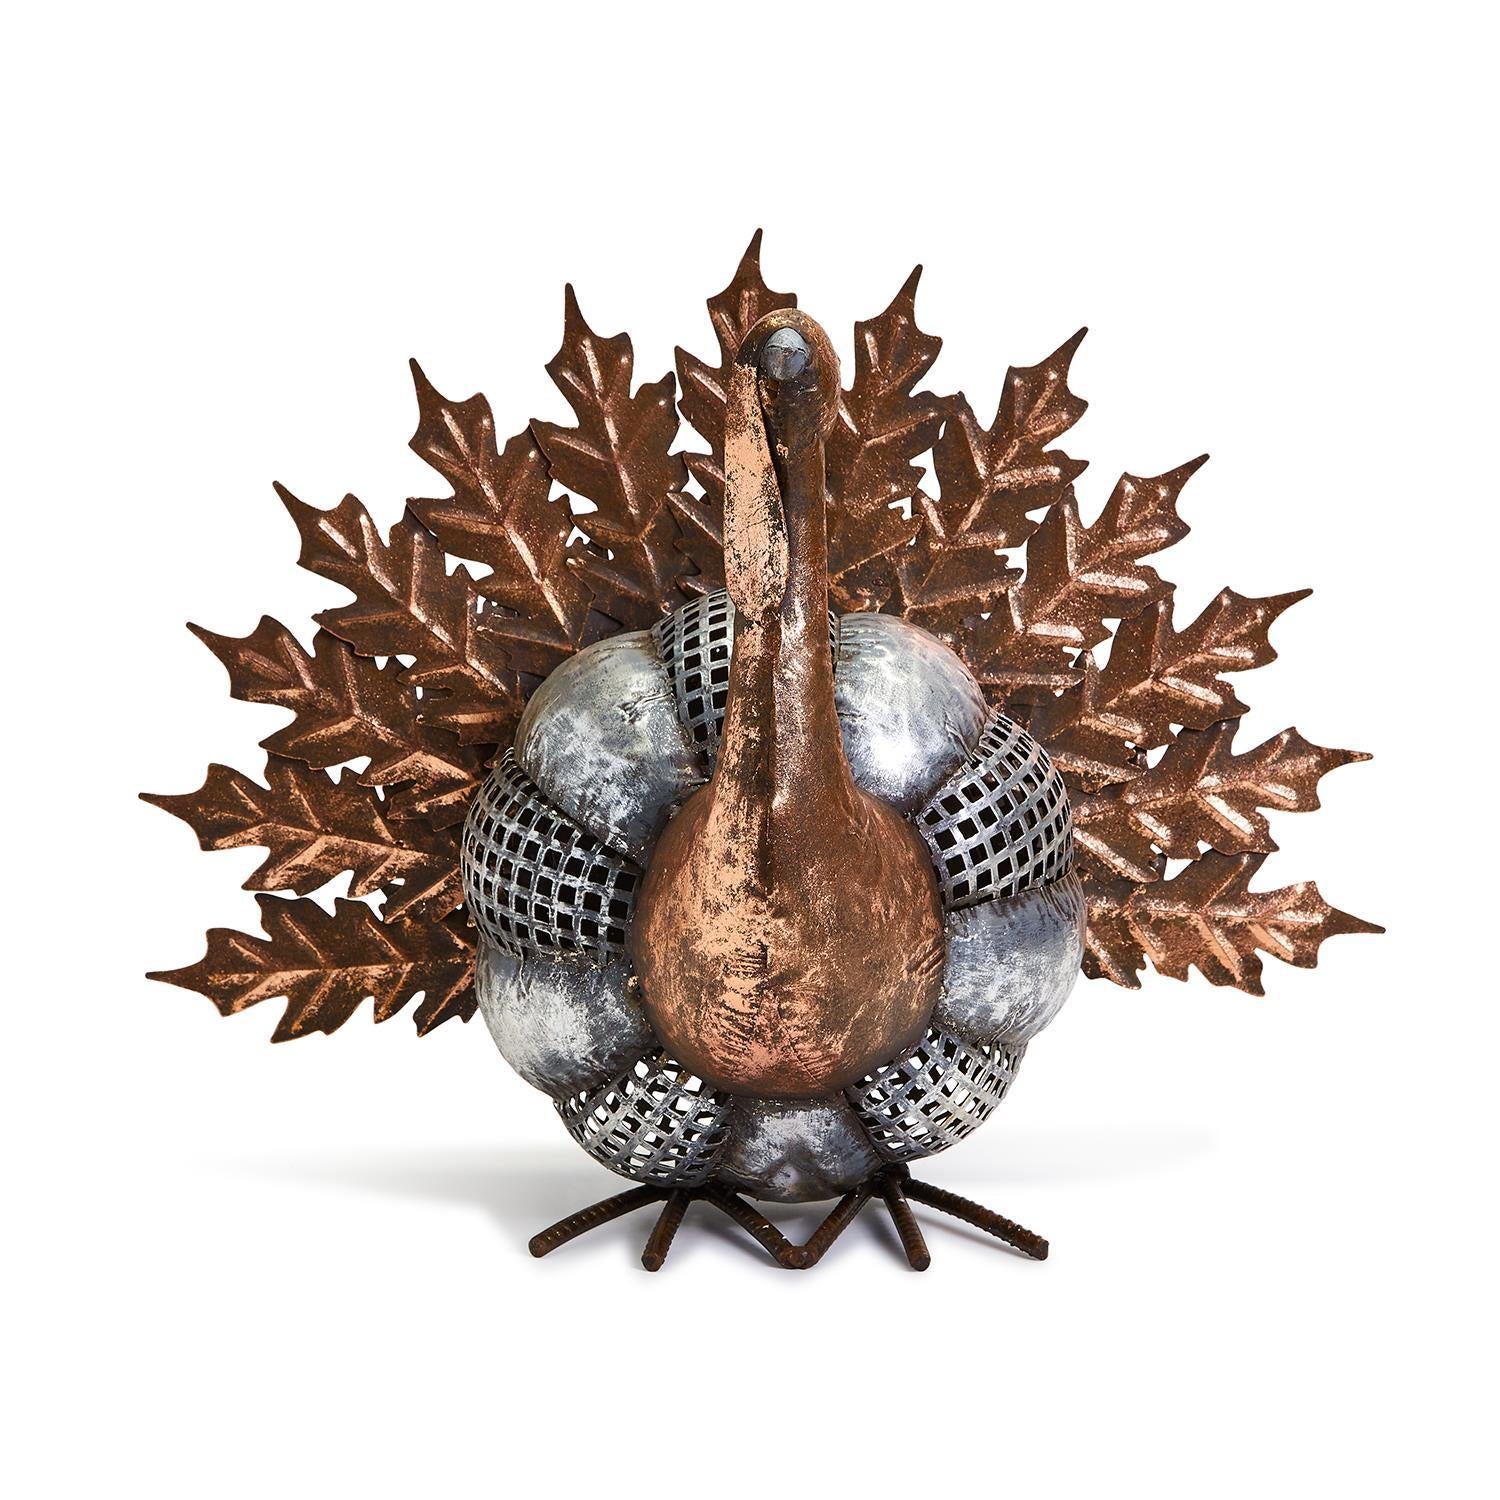 Hand-Crafted Galvanized Metal Turkey with Metallic Leaf Accent